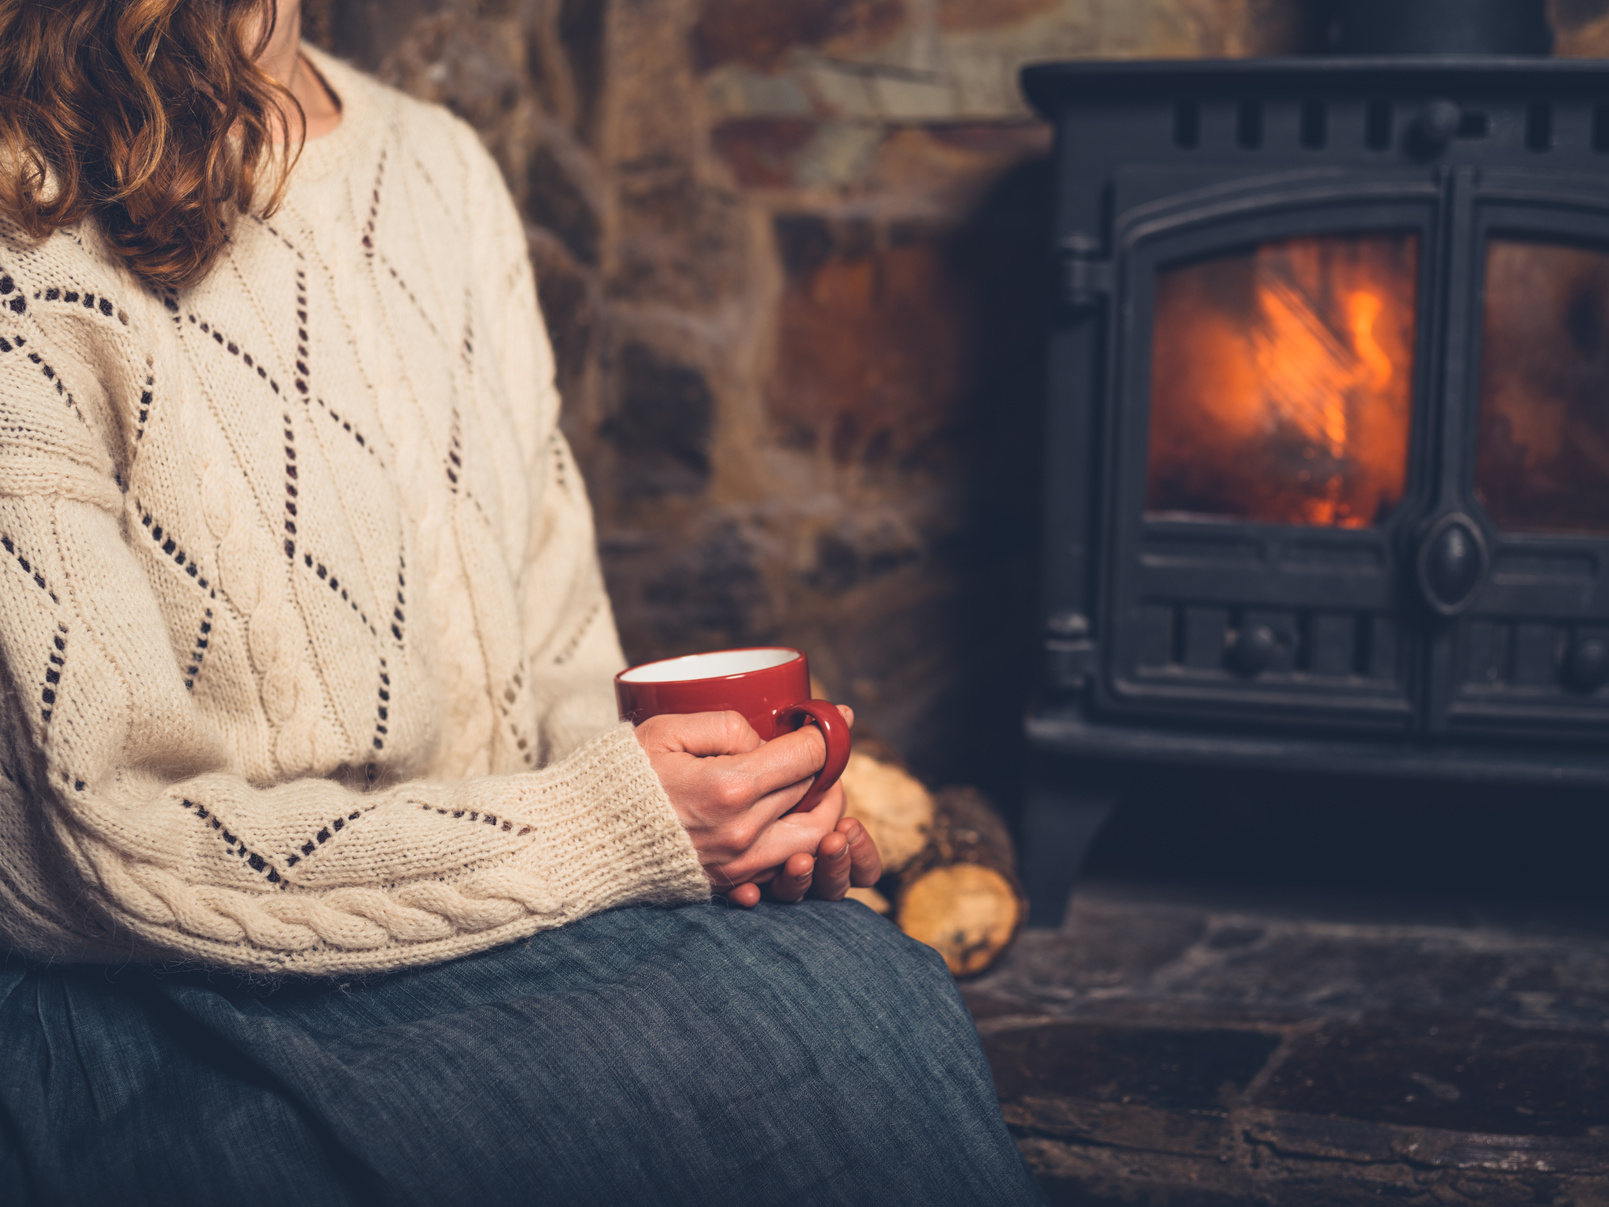 Woman in White Jumper by Fireplace with Mug